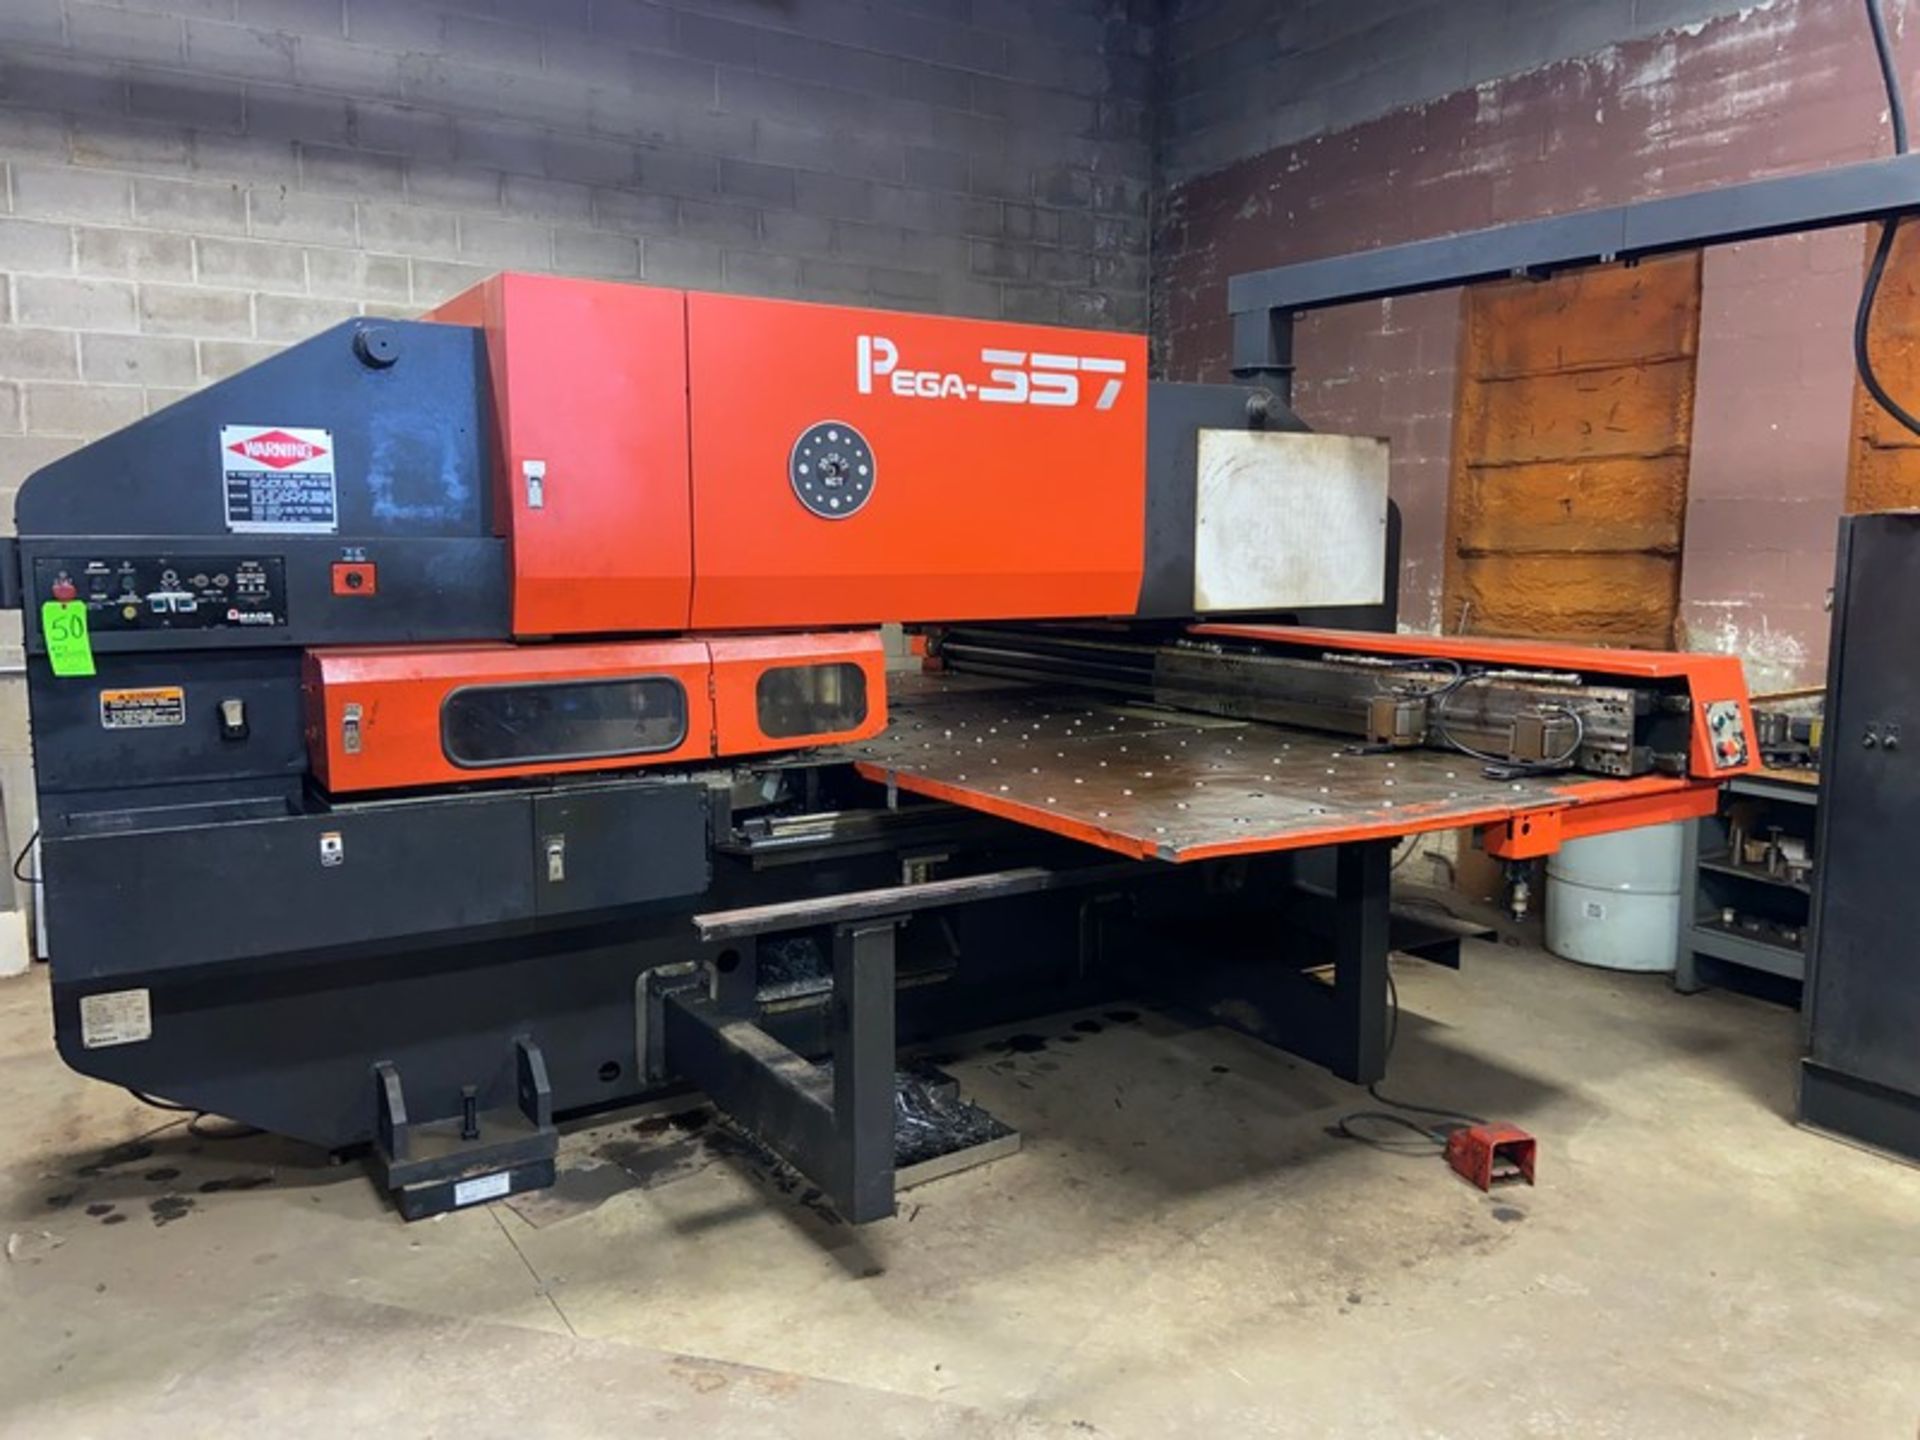 Amada Pega 357 30 Ton CNC Turret Punch, S/N AA570492, Weight 11.6, Year of Manufacture: - Image 18 of 21